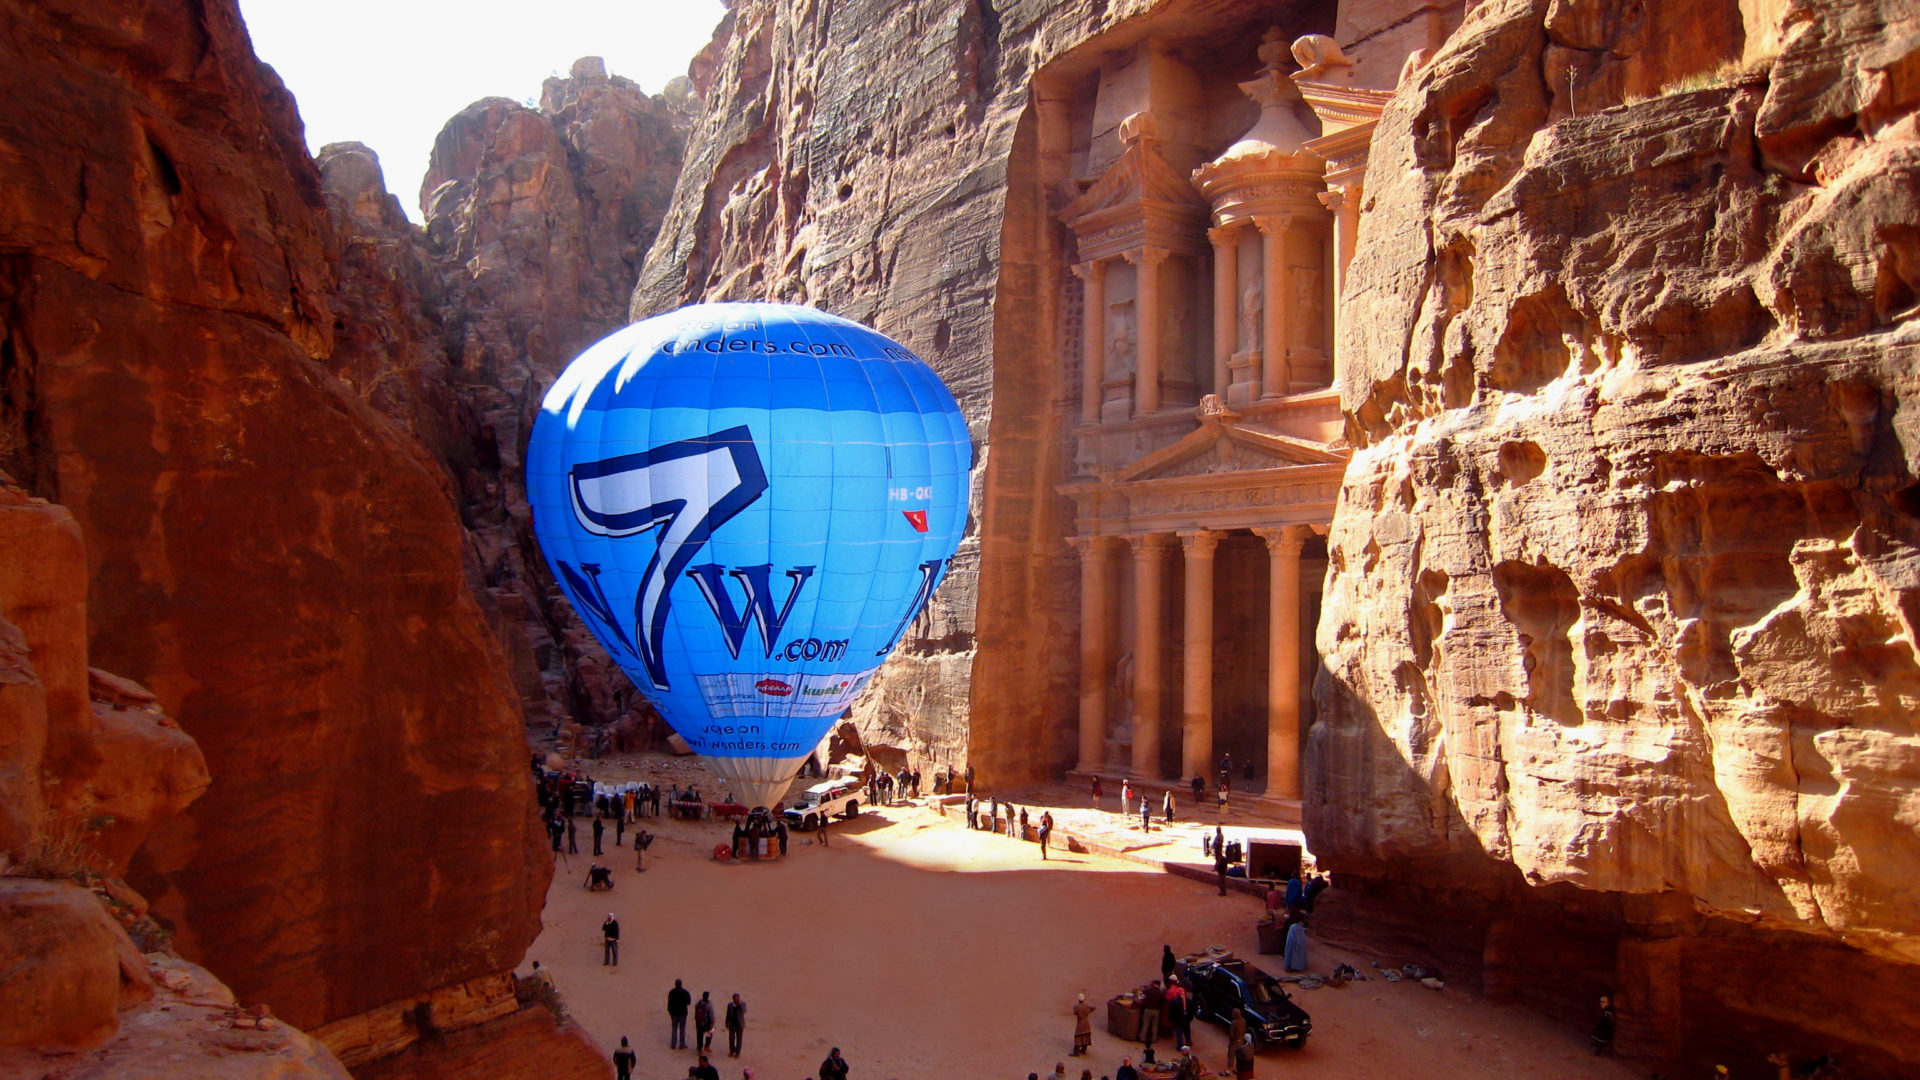 Petra  New7Wonders of the World